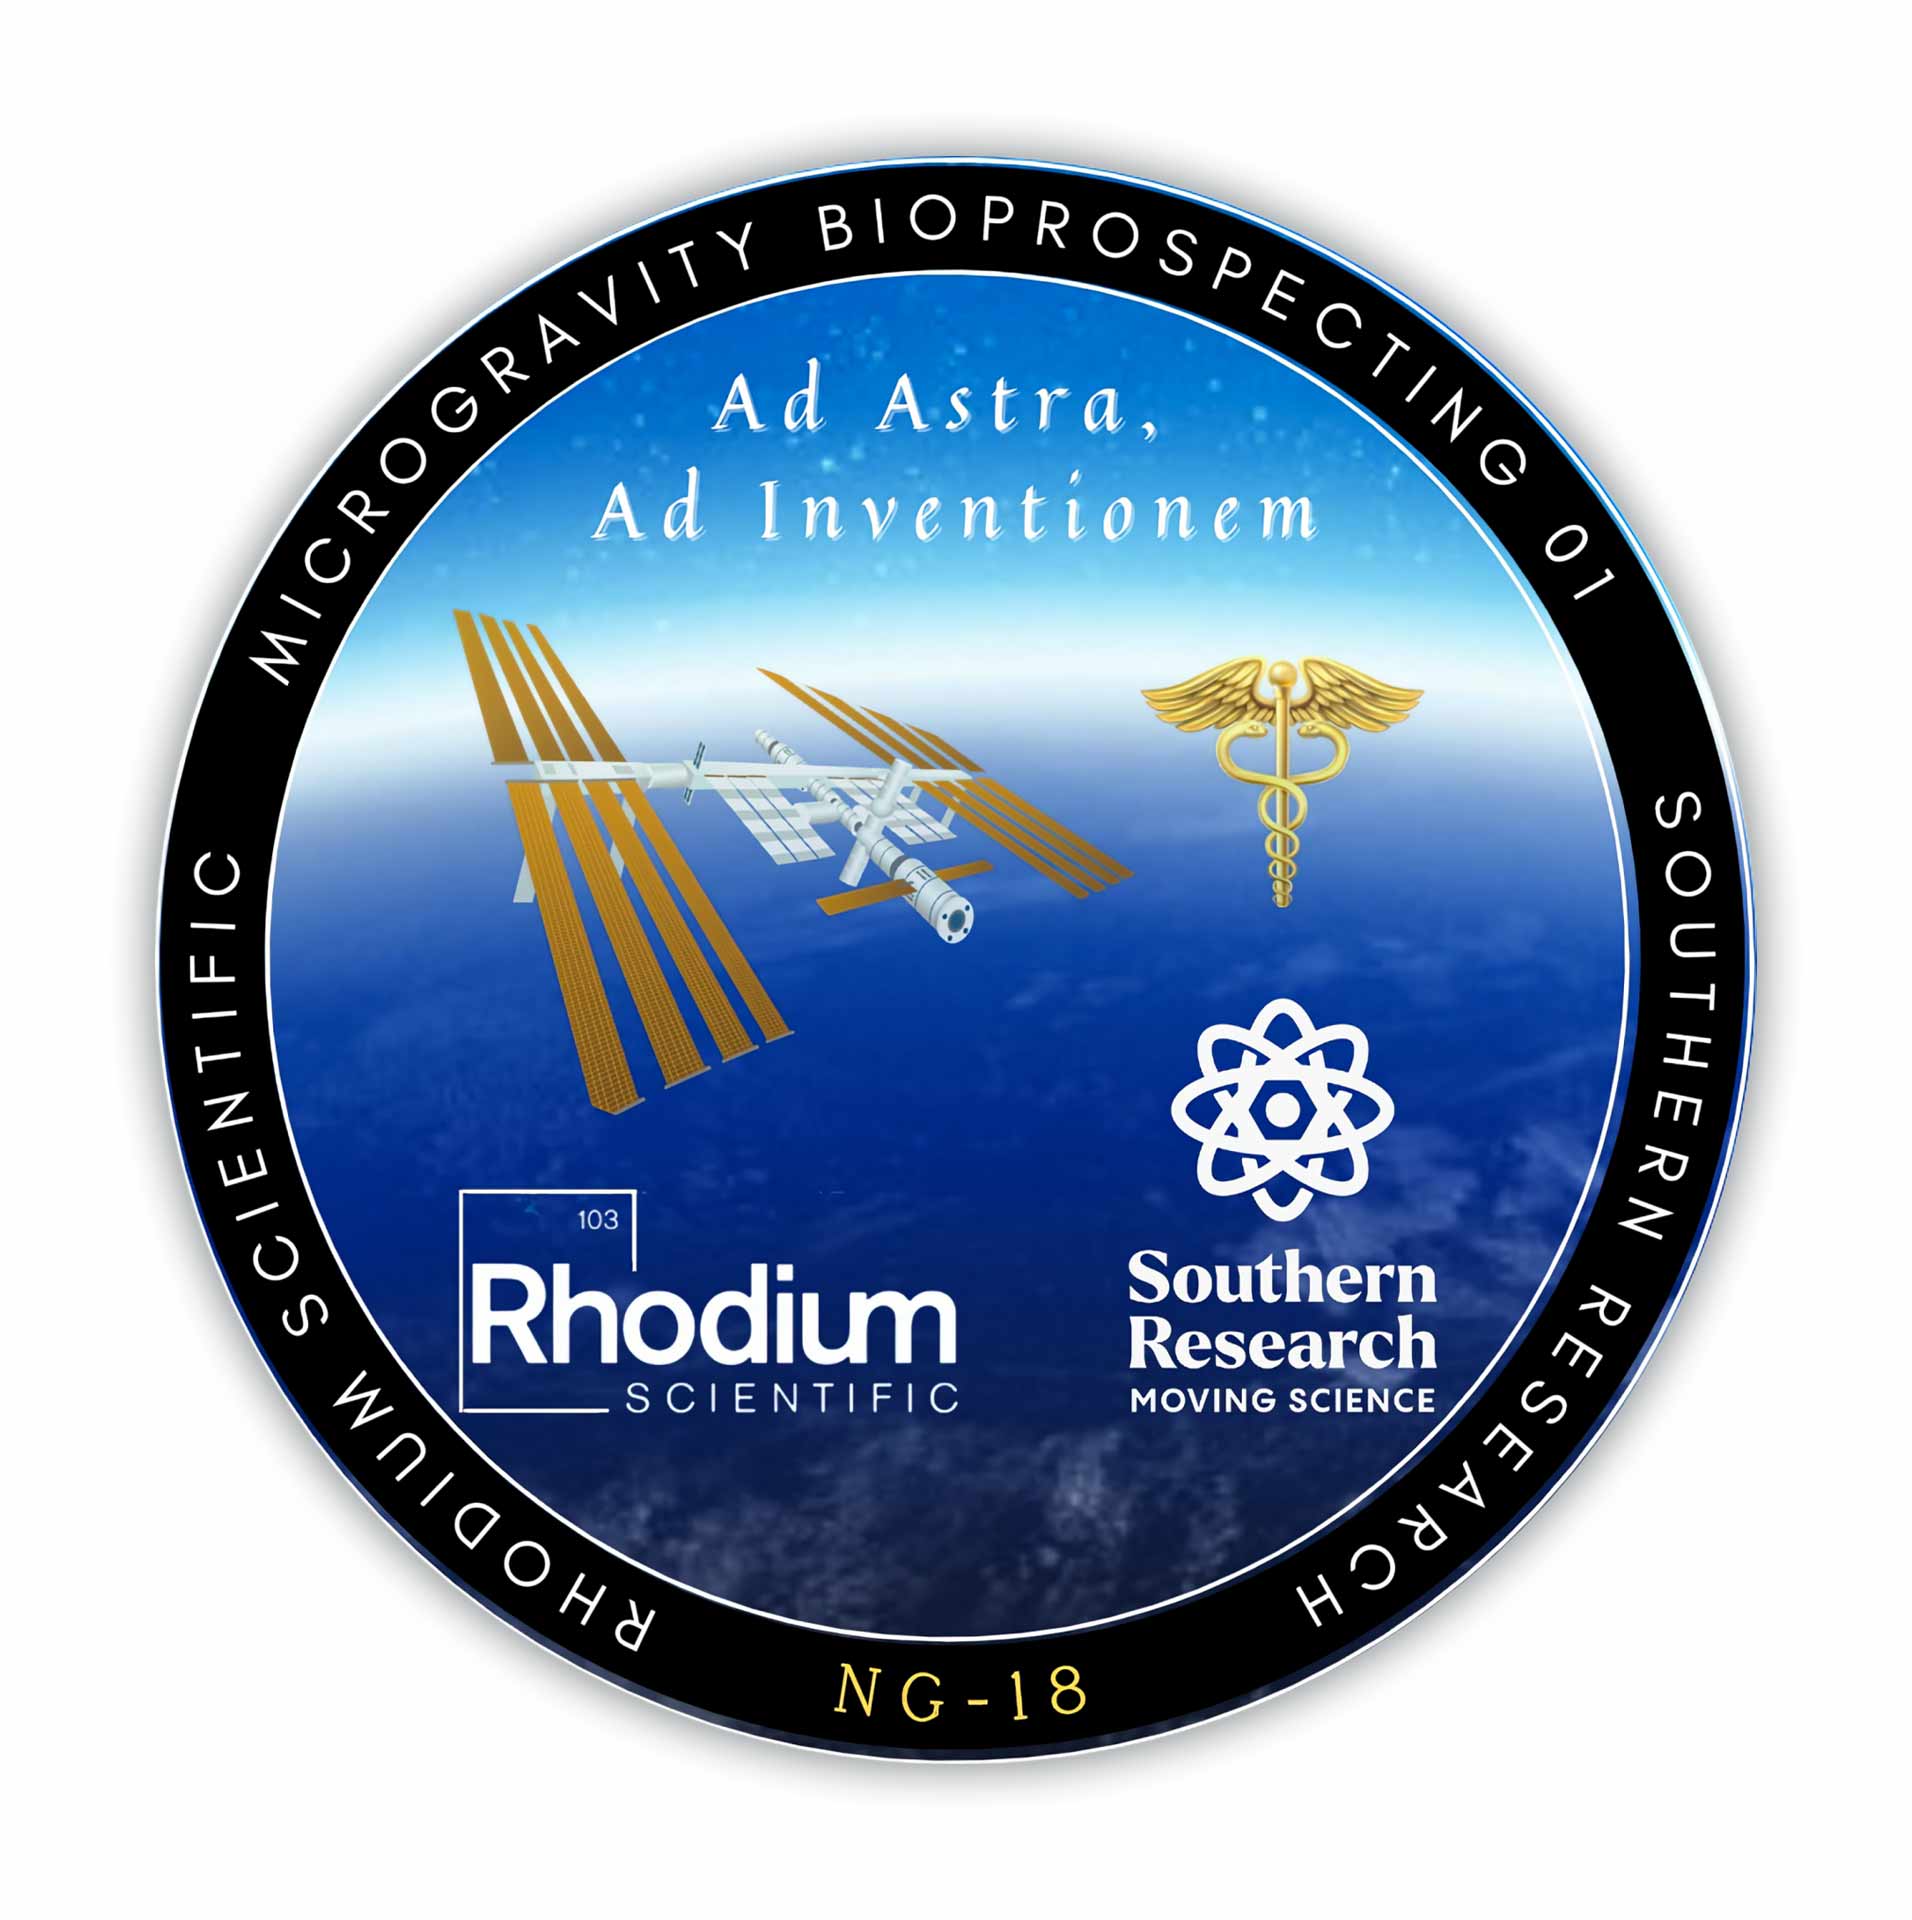 Southern Research and Rhodium Scientific send bacteria to space to explore potential cancer treatments